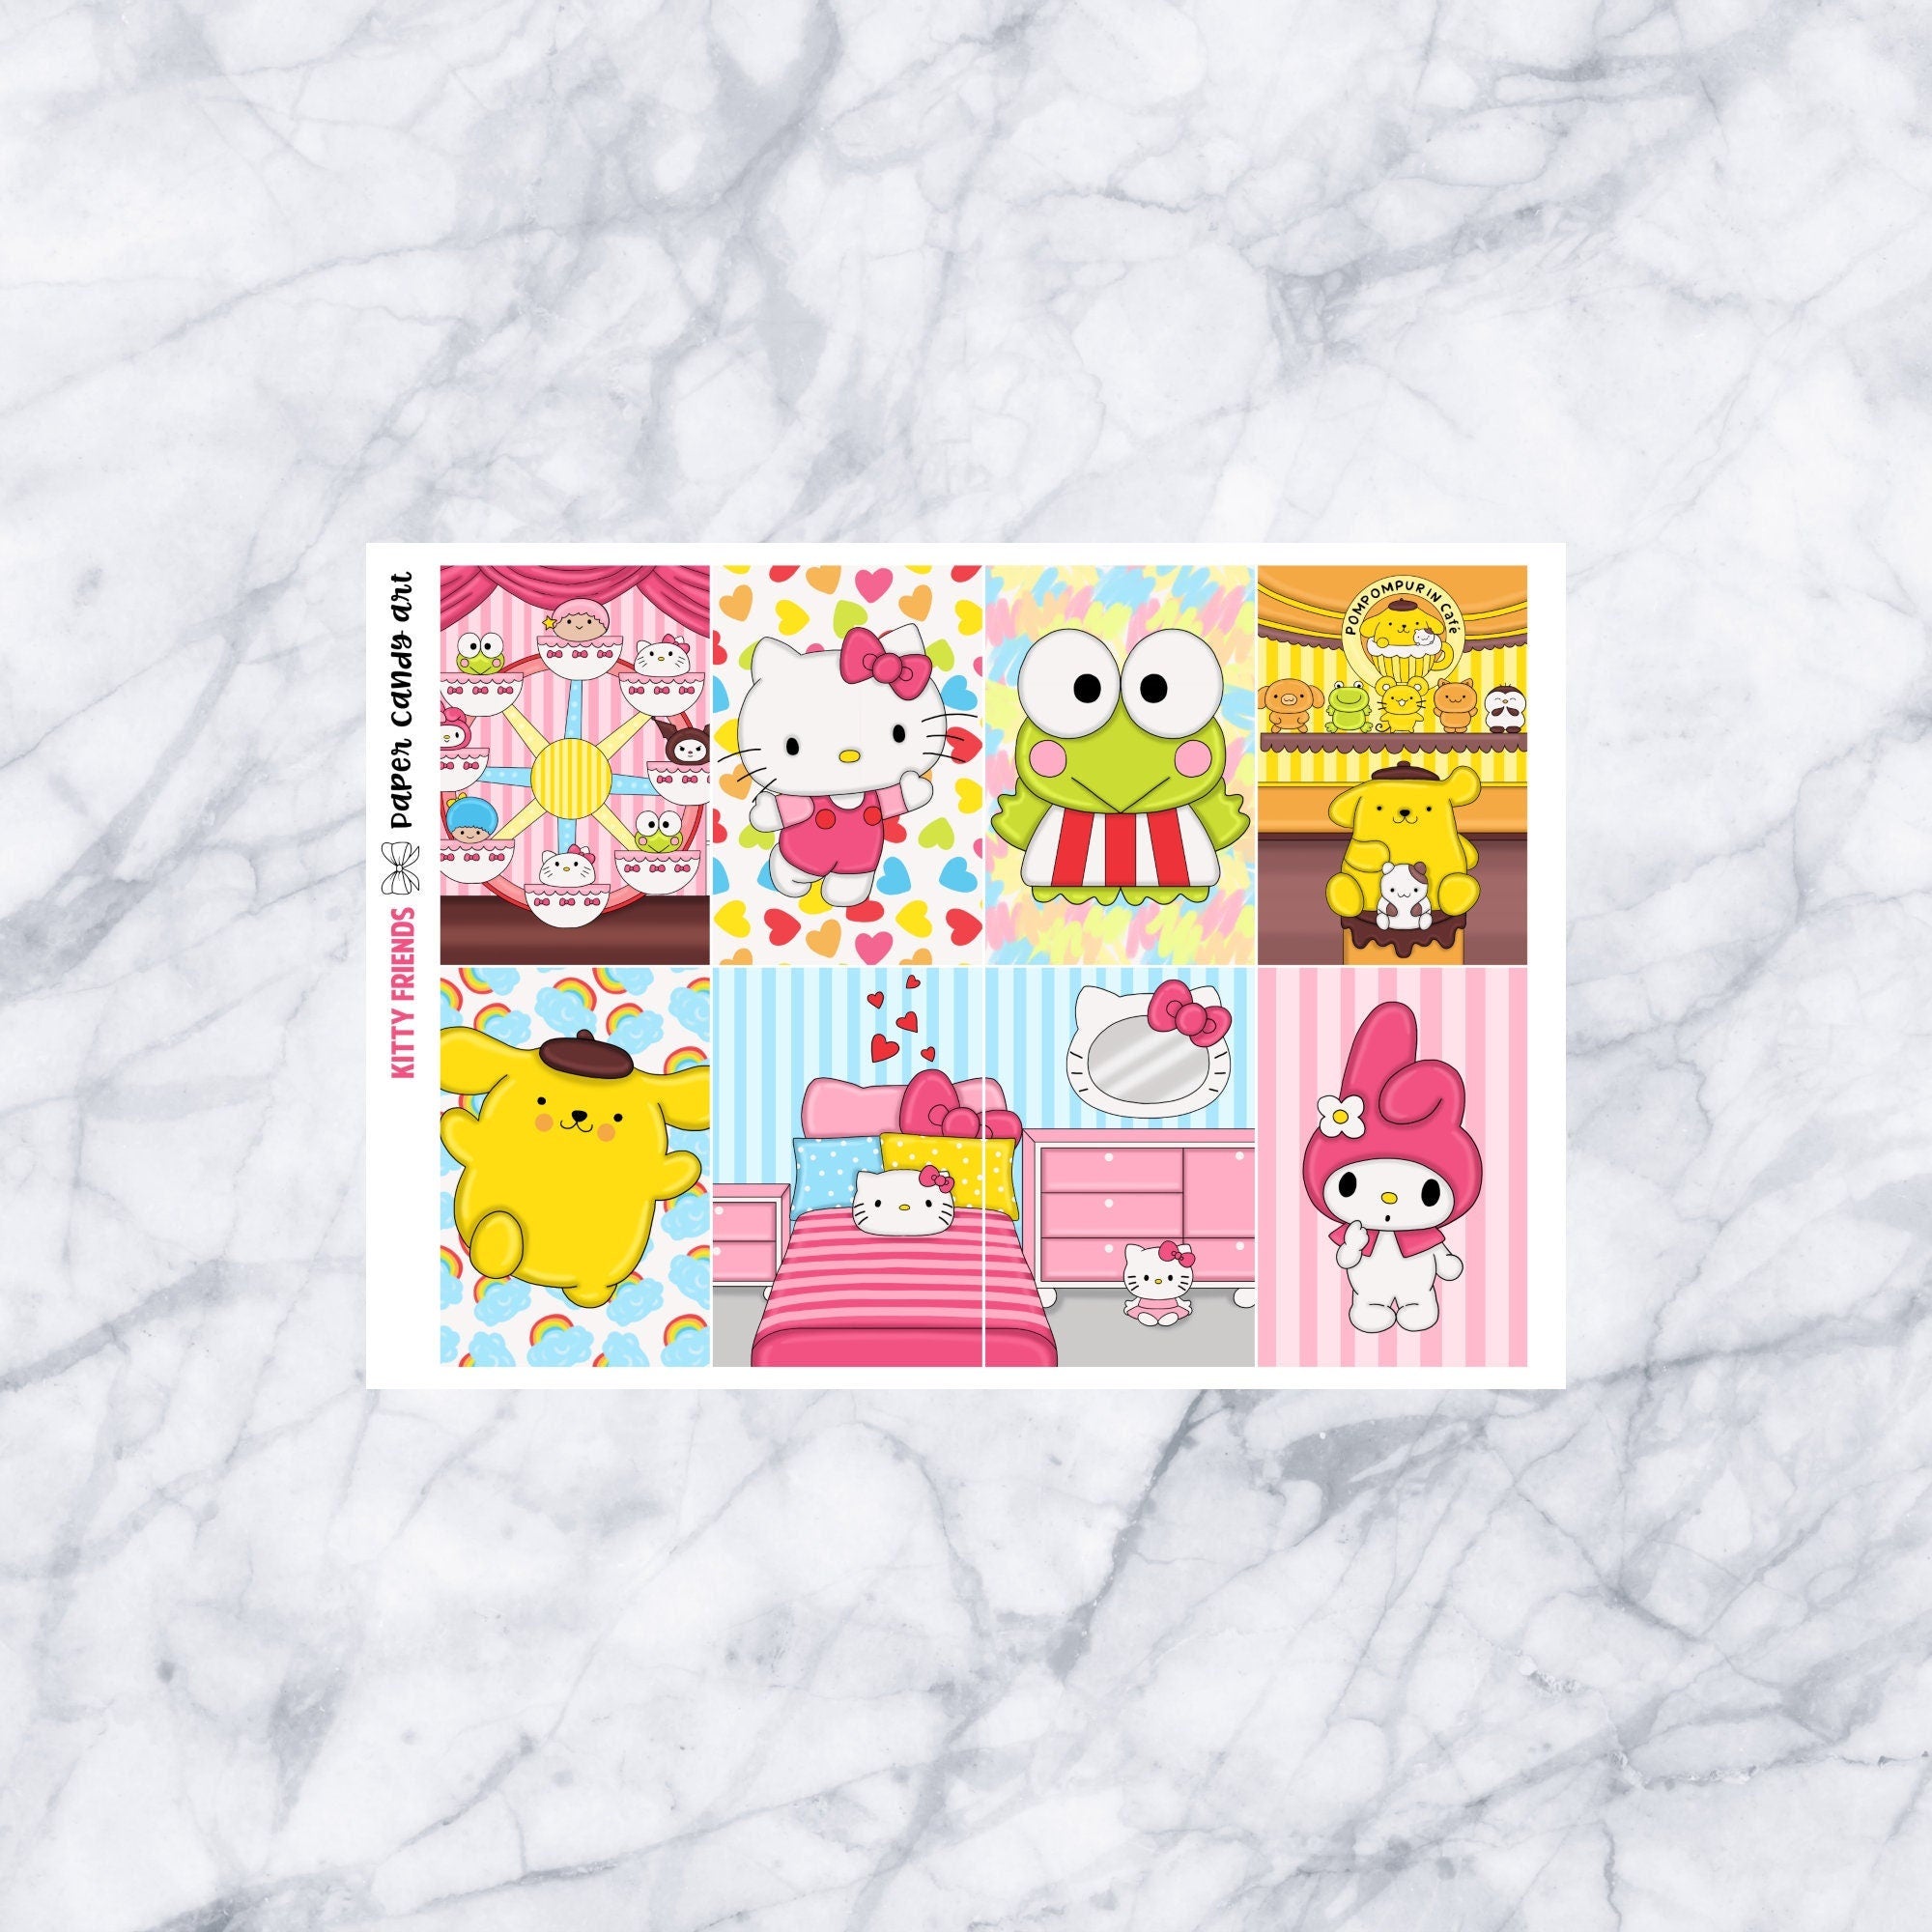 HP MINI Kit Kitty Friends // Weekly Planner Stickers Kit // Happy Planner Classic